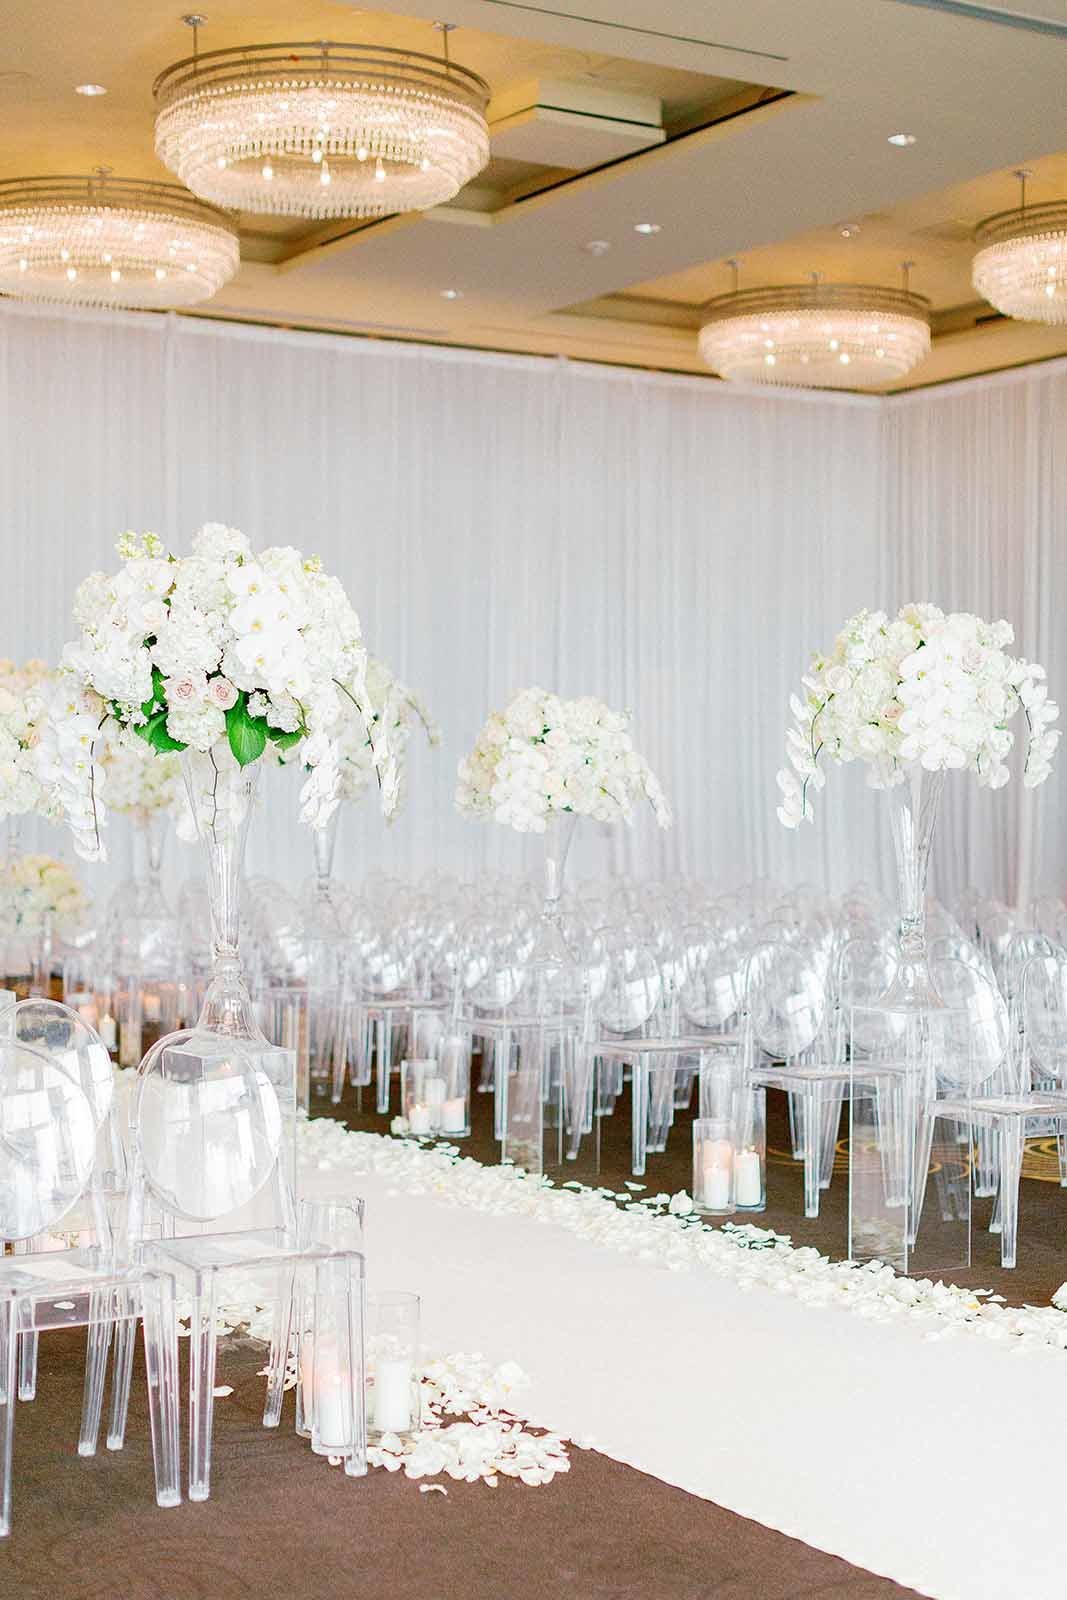 large orchid arrangements for wedding ceremony with white rose petals, white aisle runner, and clear lucite chairs